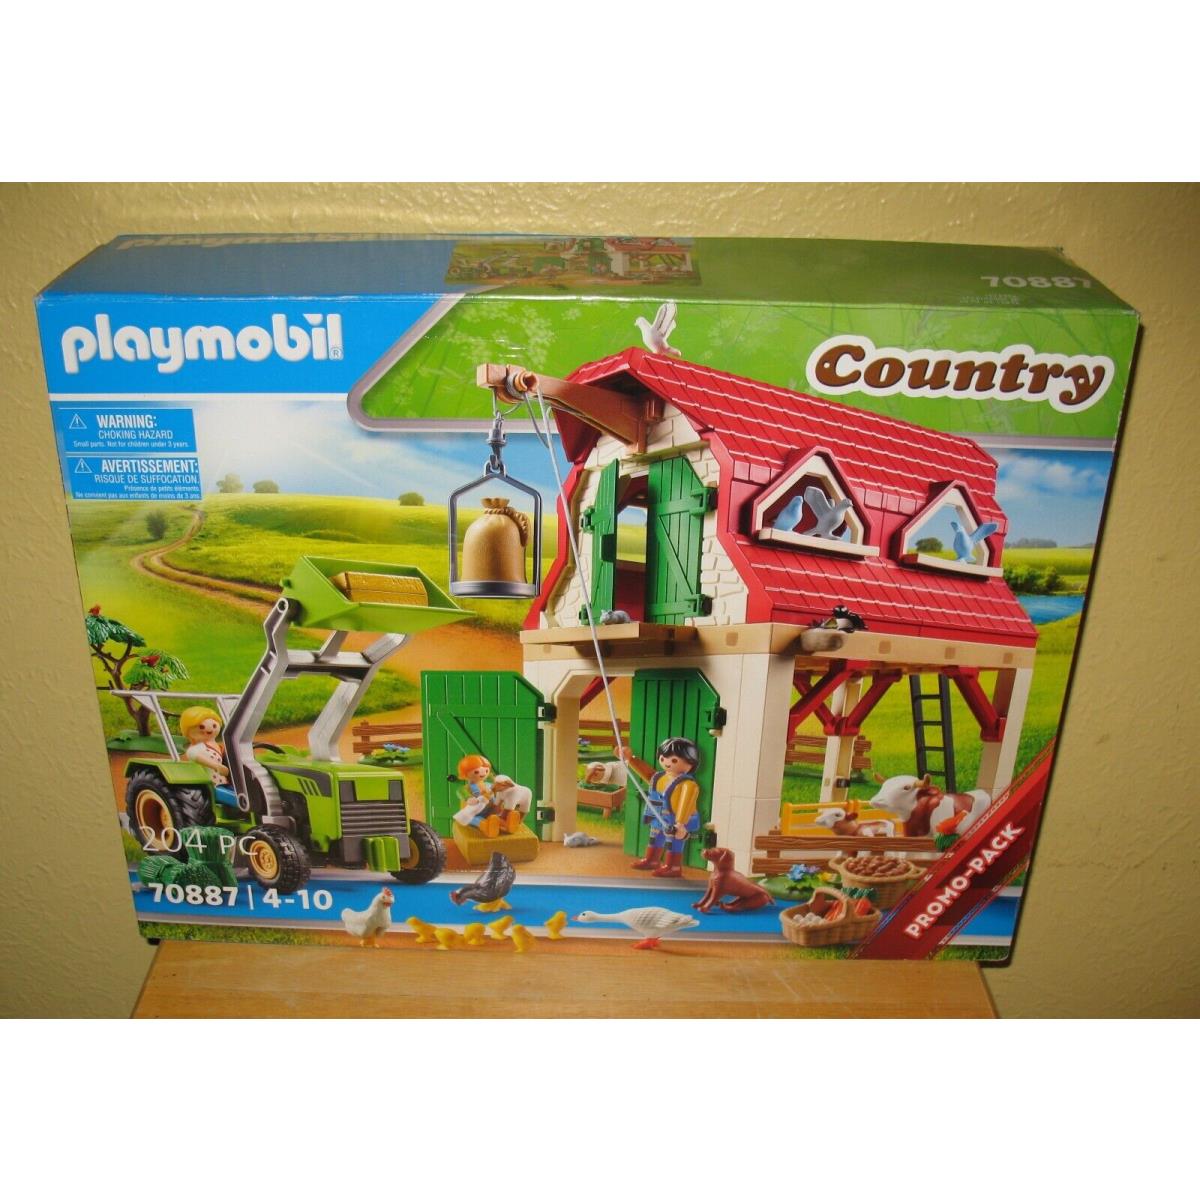 Playmobil 70887 Country Farm with Animals and Figures